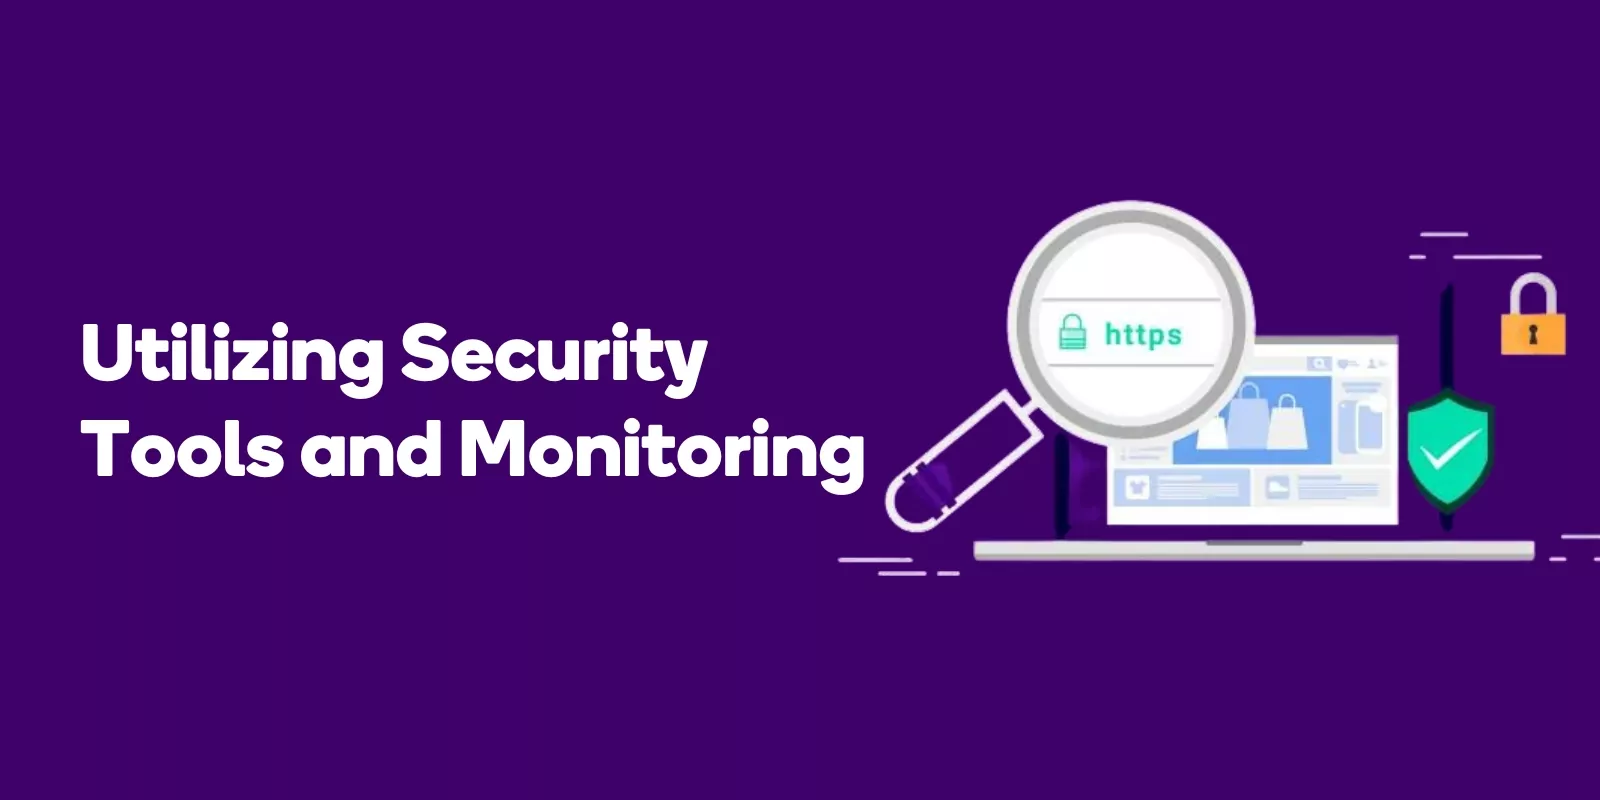 Utilizing Security Tools and Monitoring